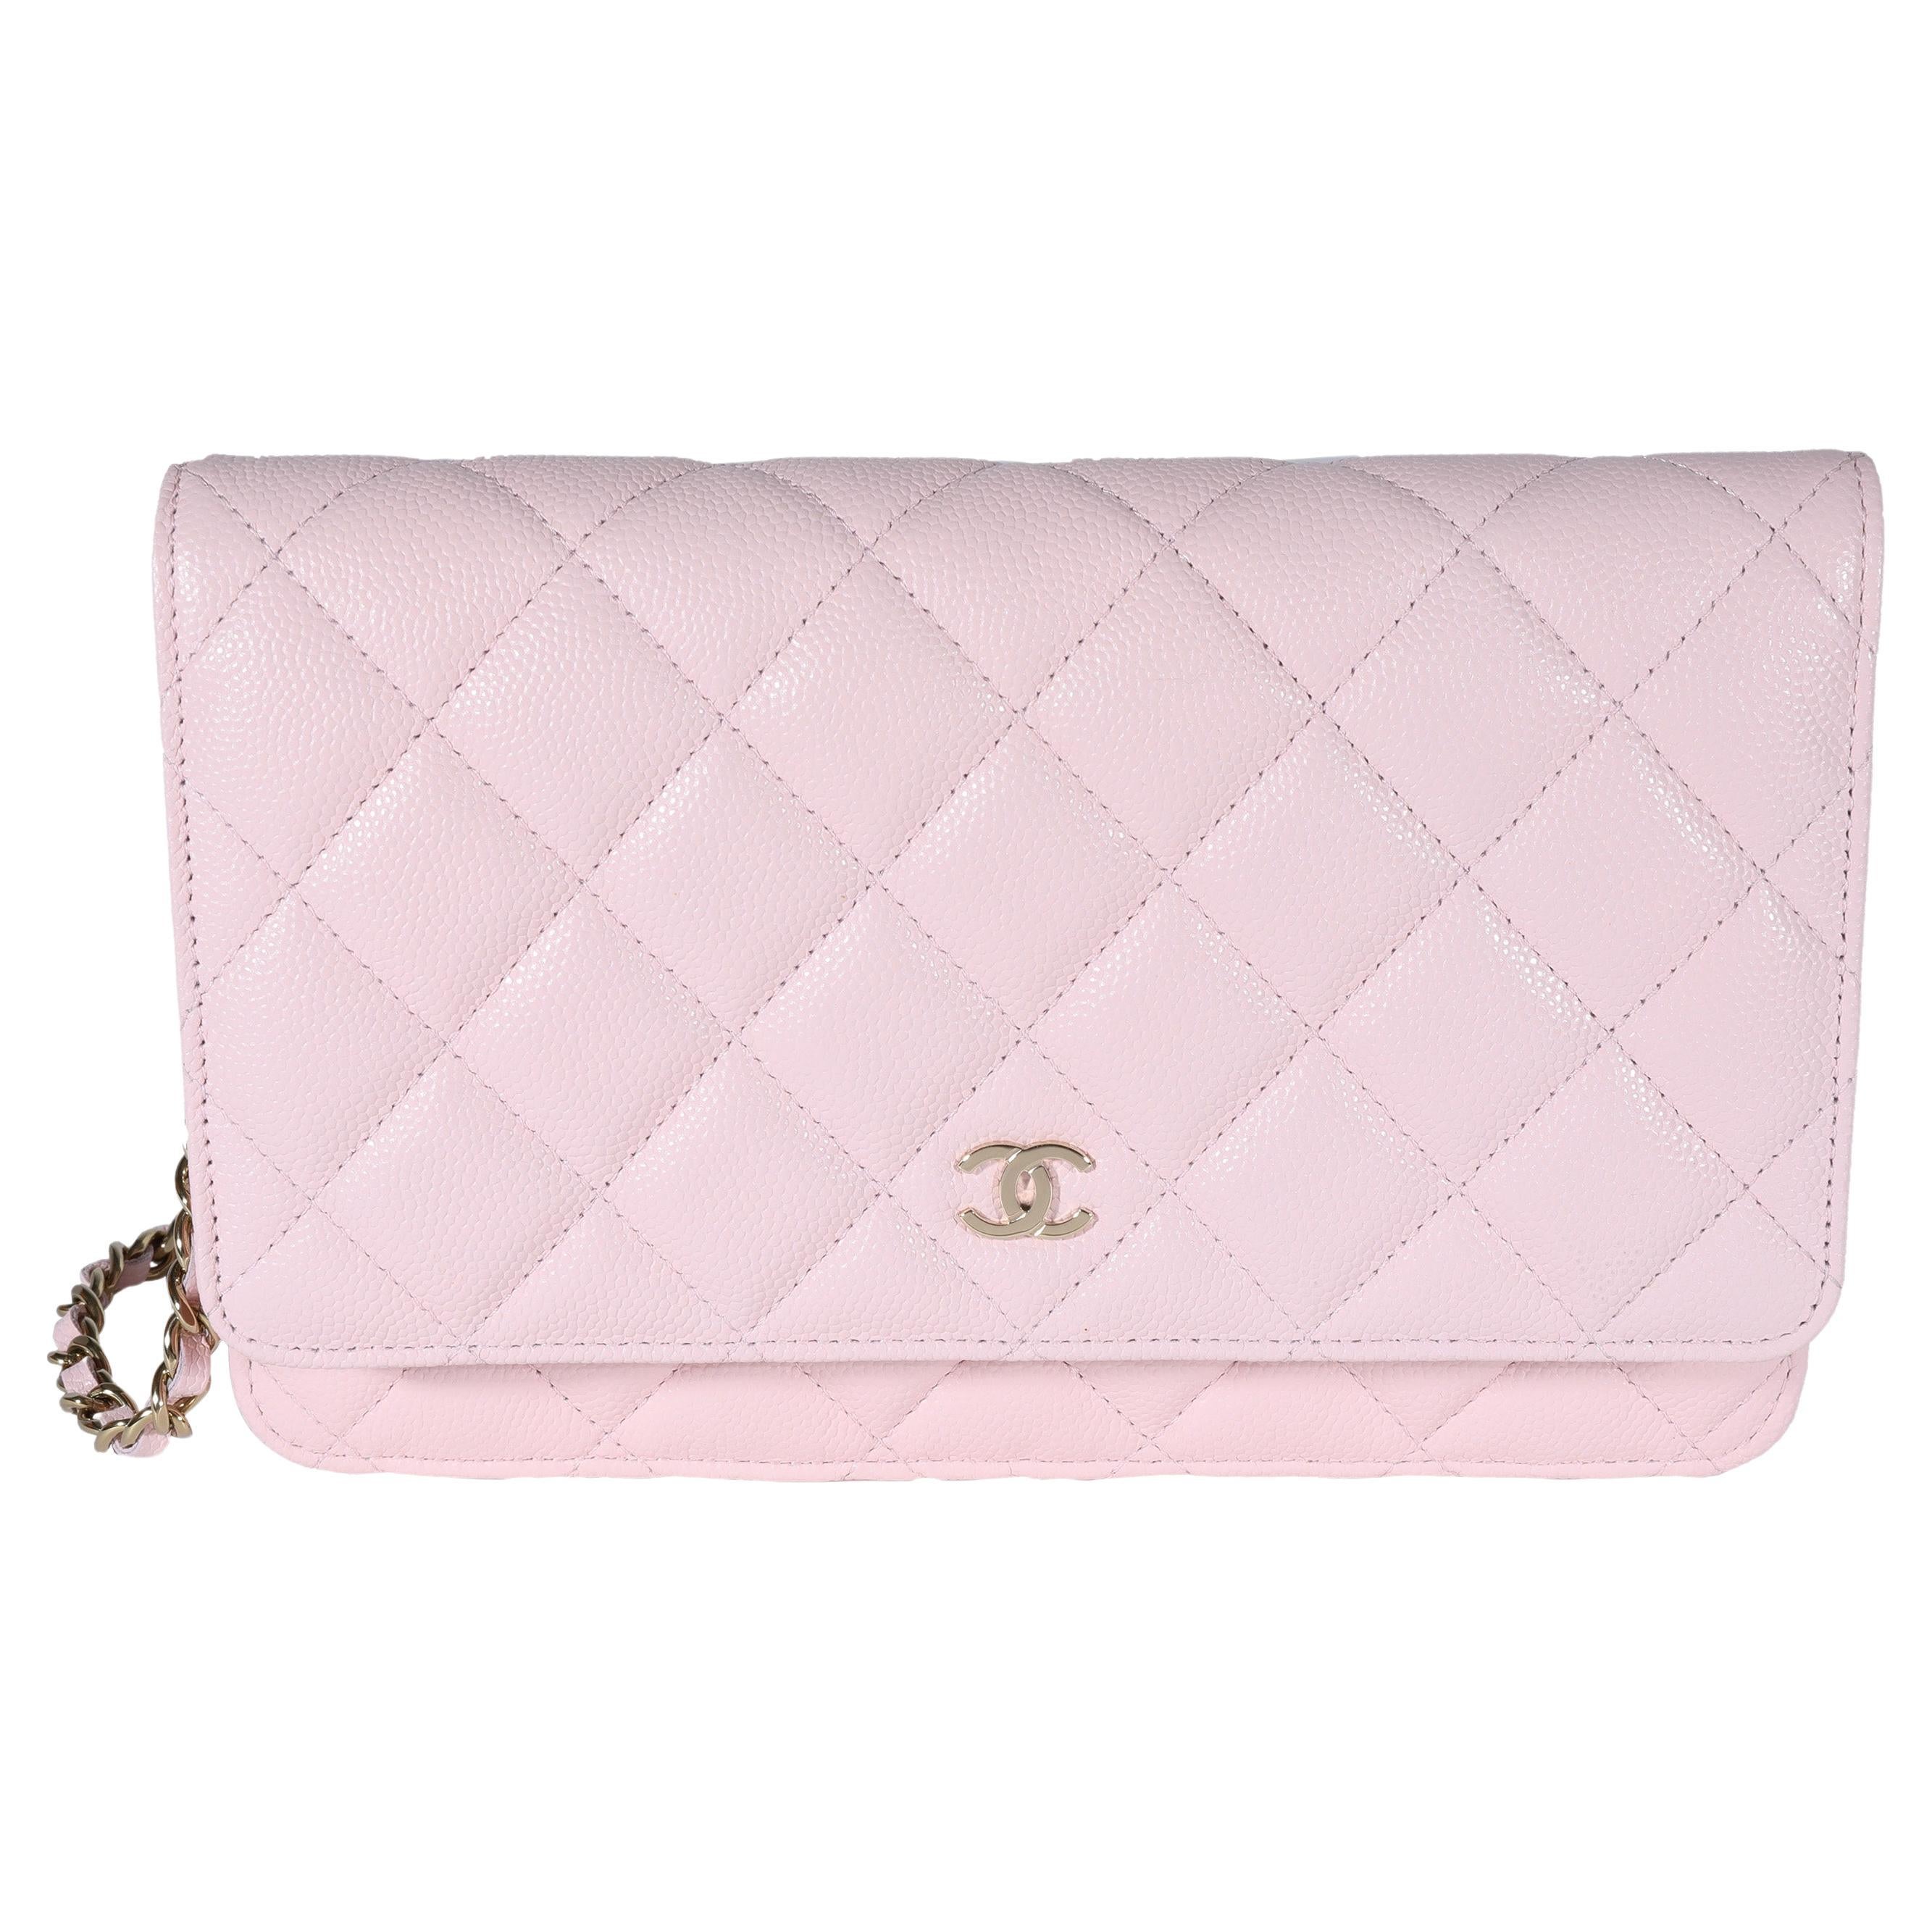 Chanel Classic Quilted WOC Crossbody Bag Light Pink in Leather